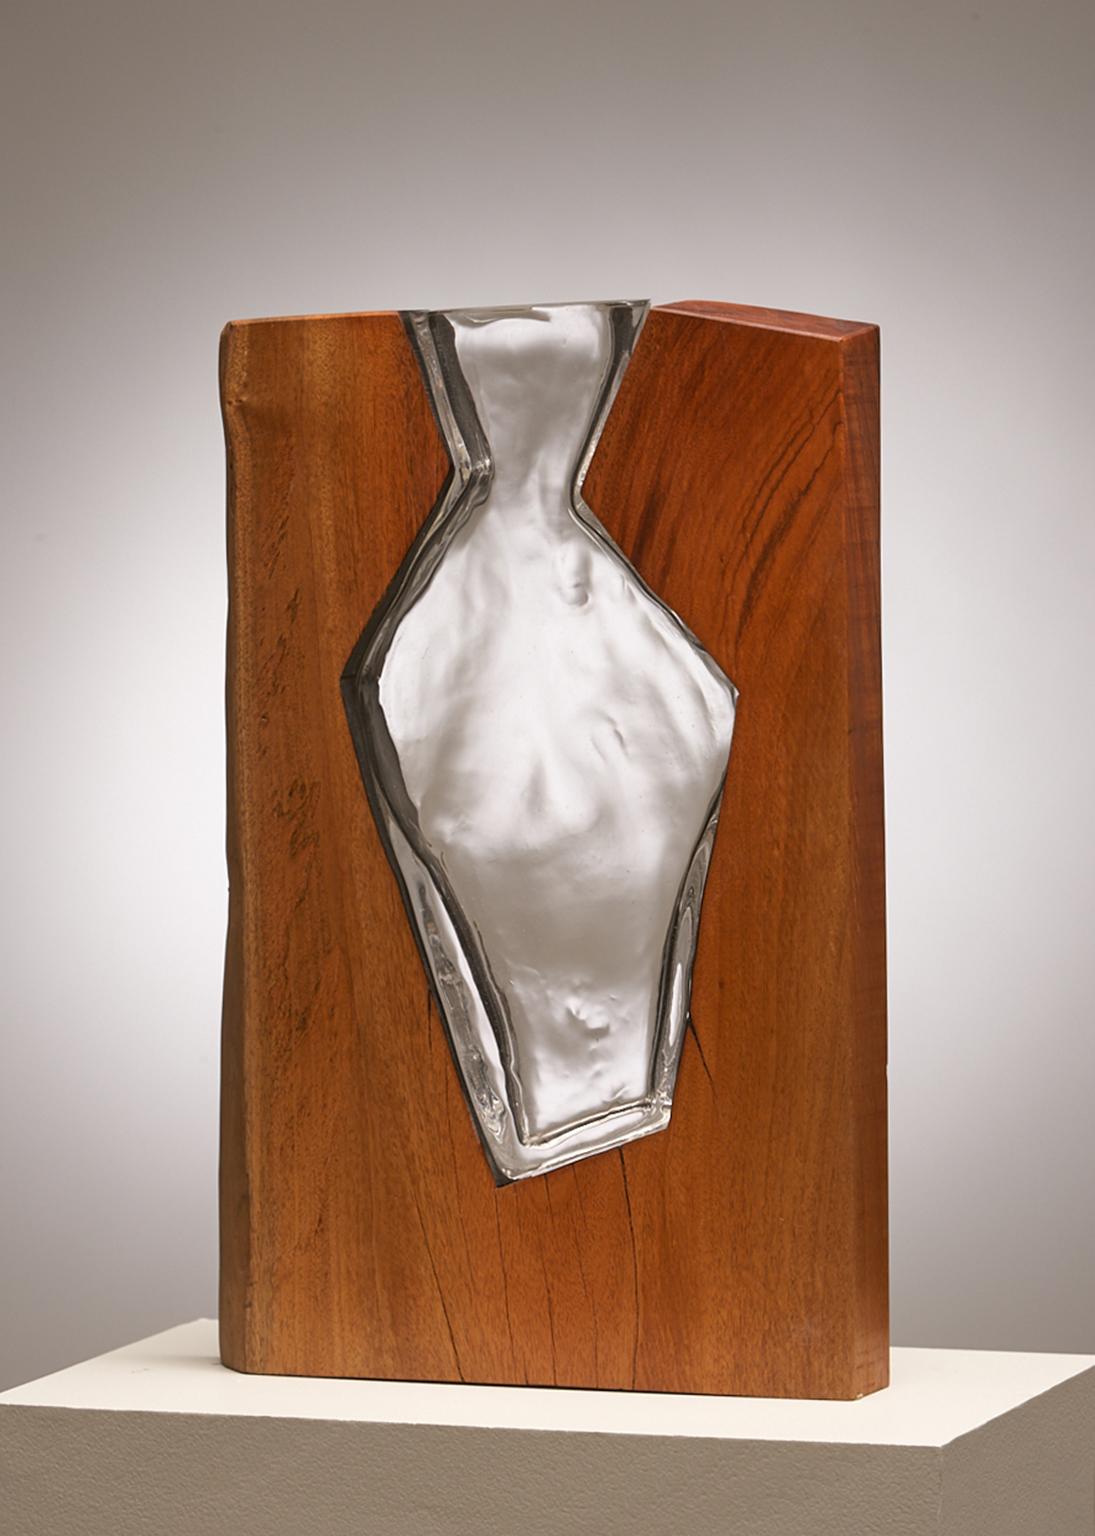 Hand Blown Clear Glass with Live Edge Wood "Vase" Sculpture, Scott Slagerman - Mixed Media Art by Scott Slagerman and Jim Fishman